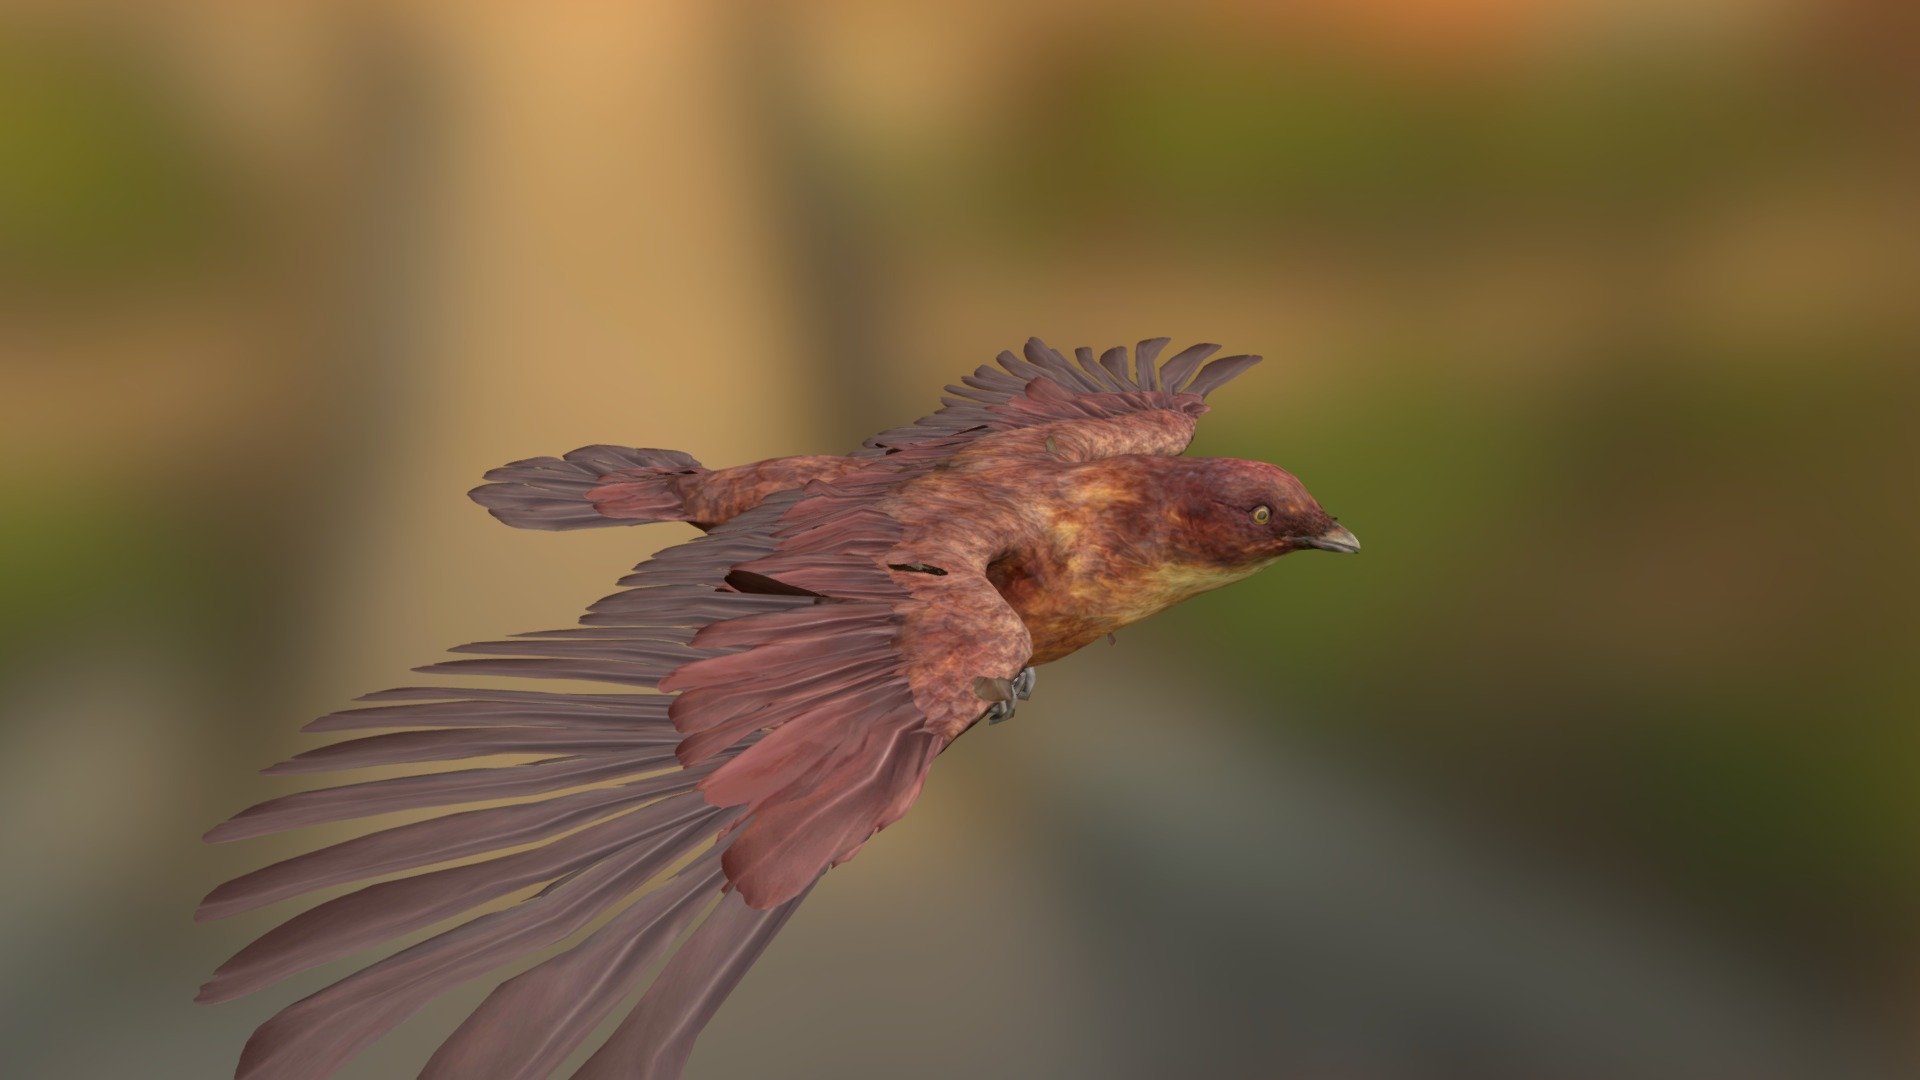 A detailed model of a bird, rigged and animated, with morph targets to open and close the wings 3d model